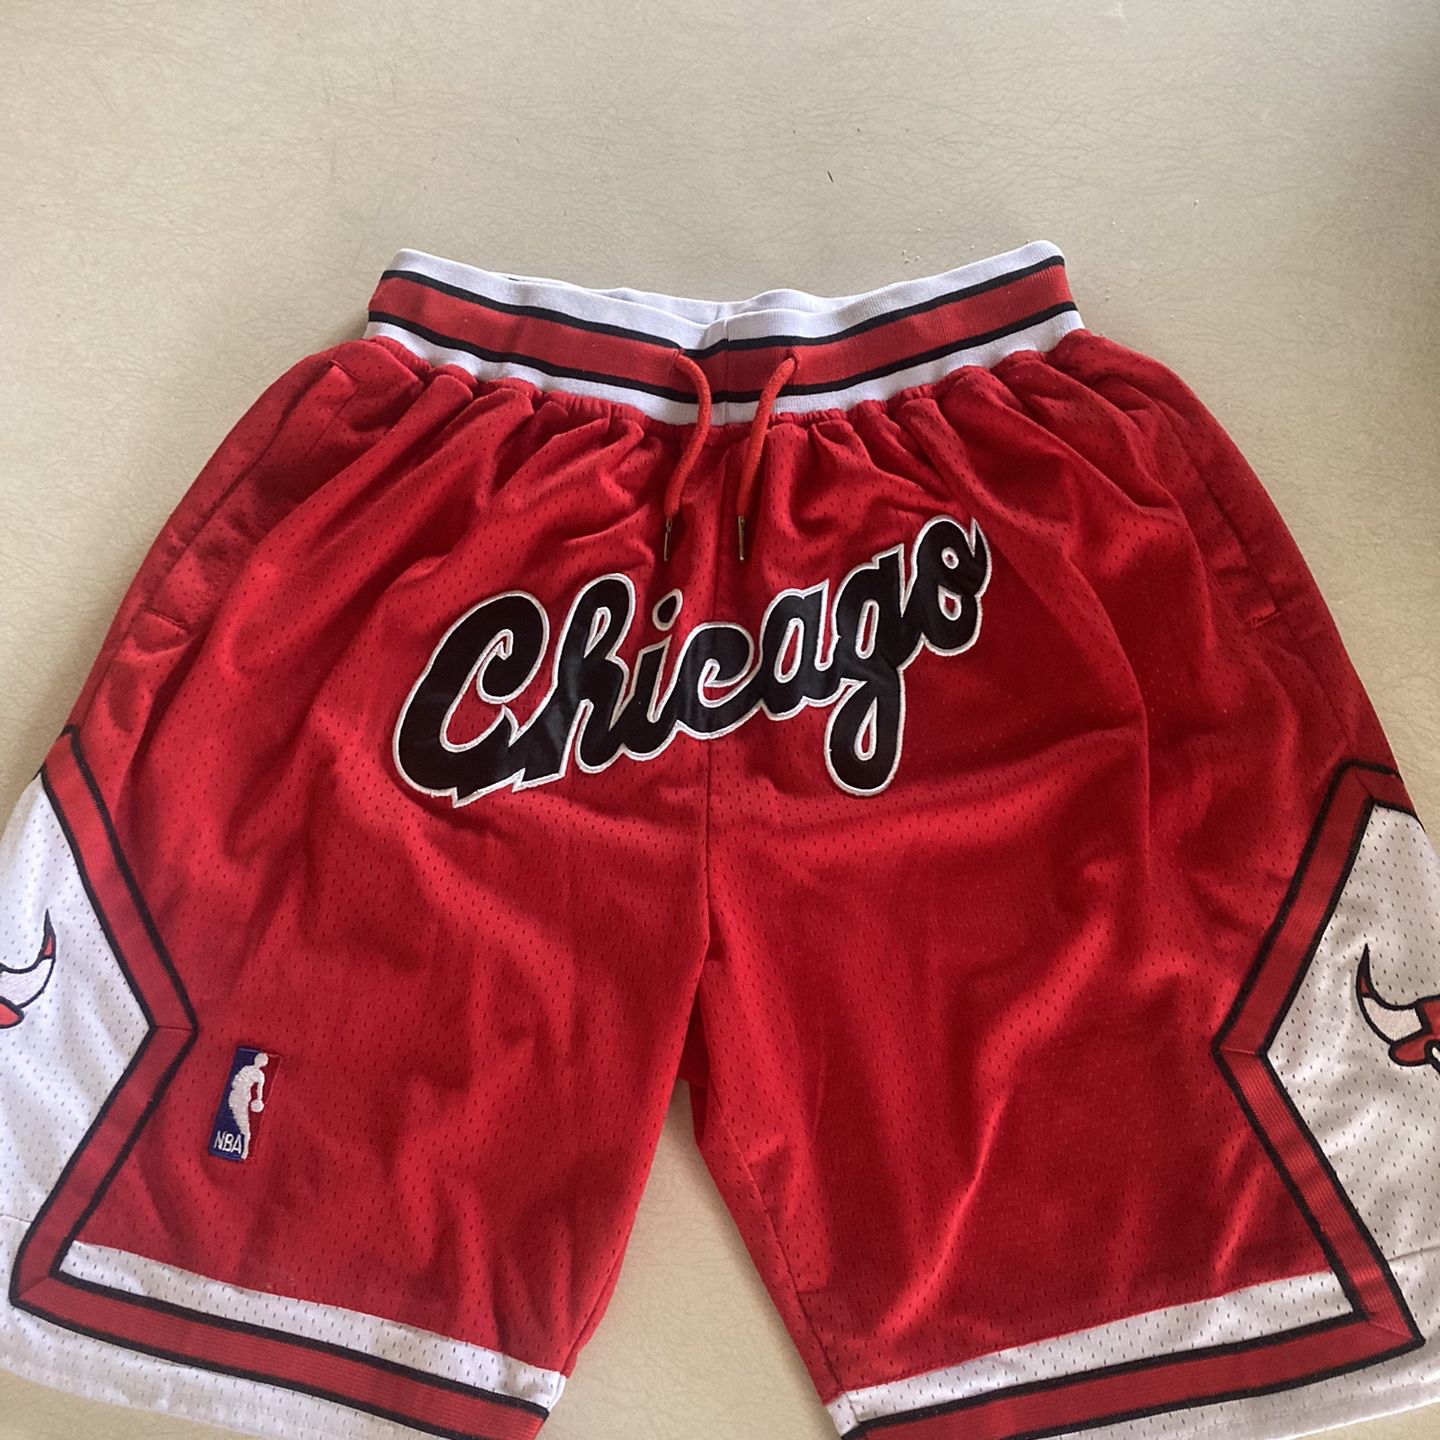 Chicago Bulls Nba Shorts Pinstripe Black And Red Just Don Vintage Throwback  Hardwood Classics Stitched Size S for Sale in Jacksonville, FL - OfferUp